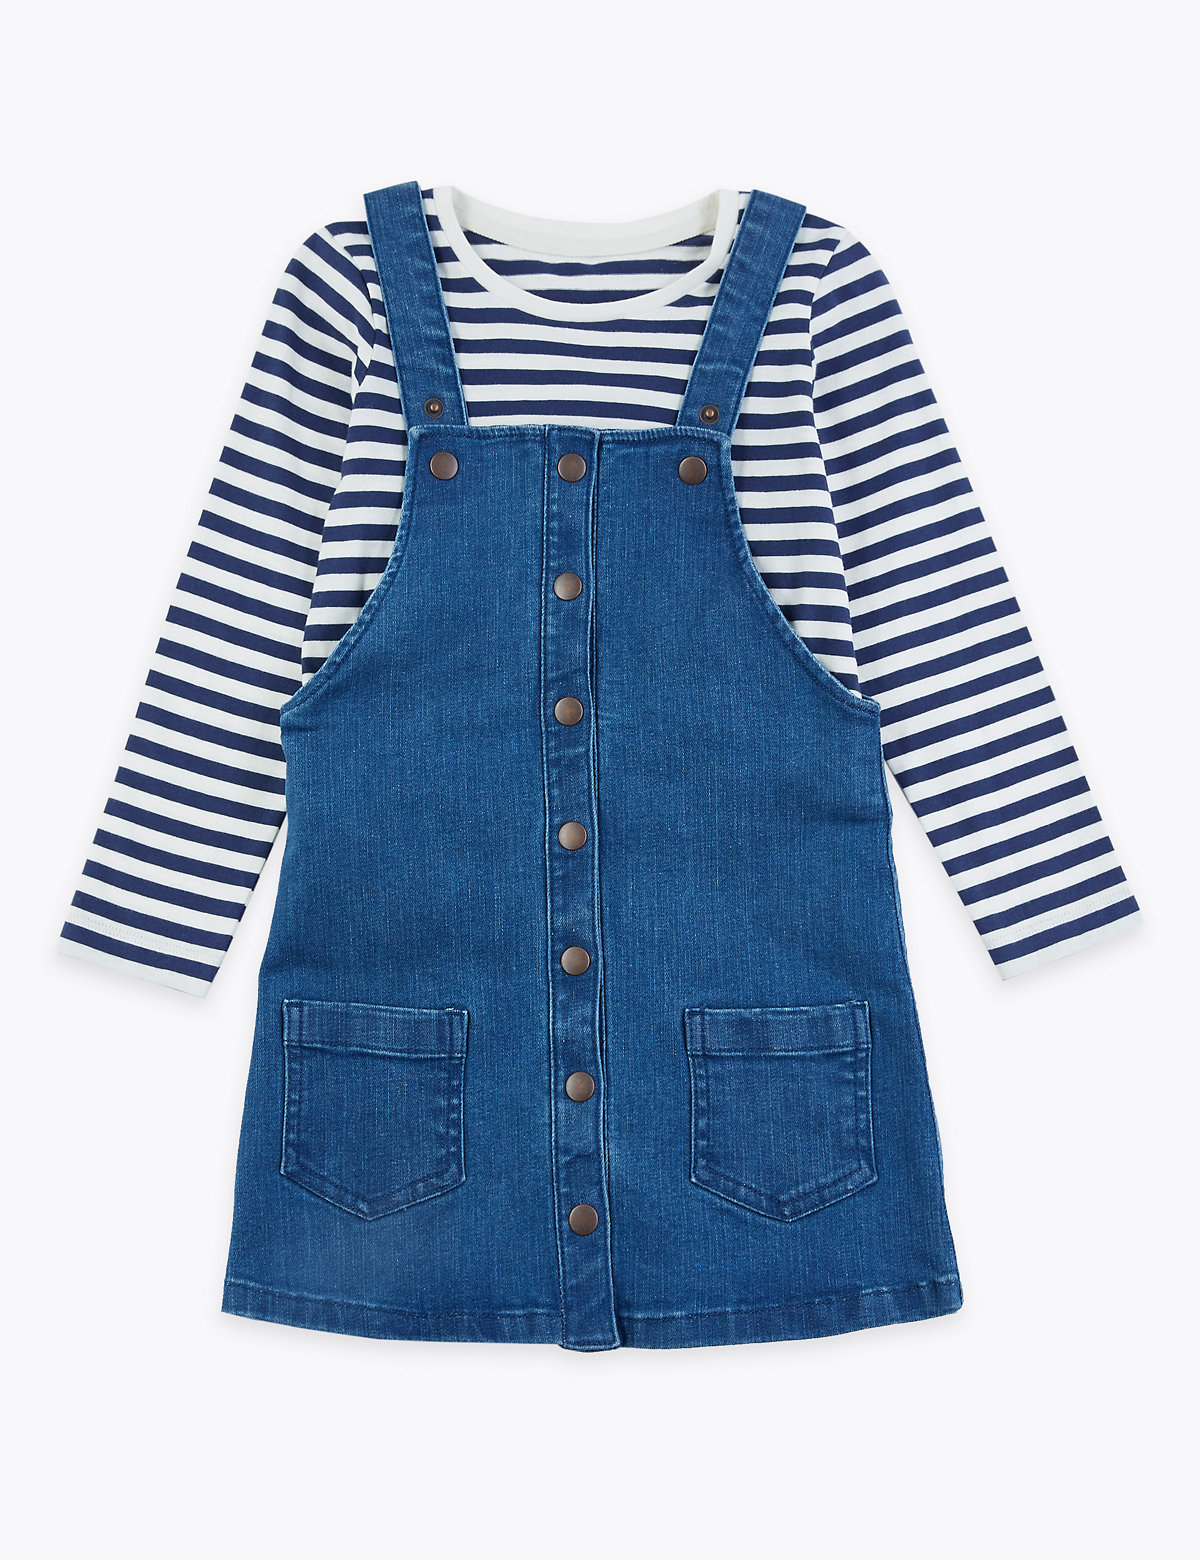 2 Piece Denim Pinafore Outfit (3 Mths - 7 Yrs)